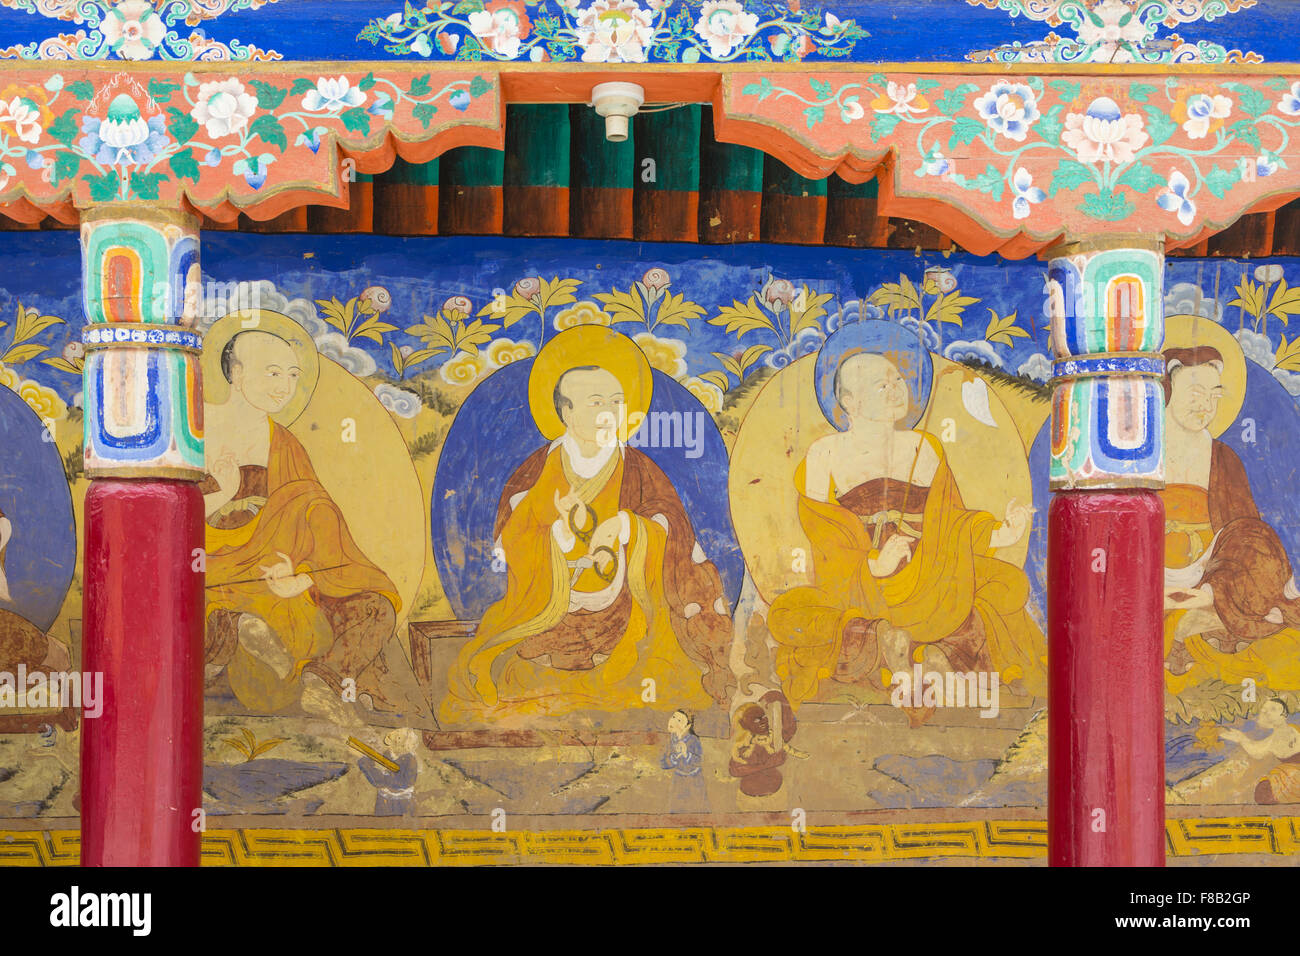 Buddhist fresco in Thiksay monastery near Leh in Ladakh, a part of Jammu & Kashmir state in India Stock Photo